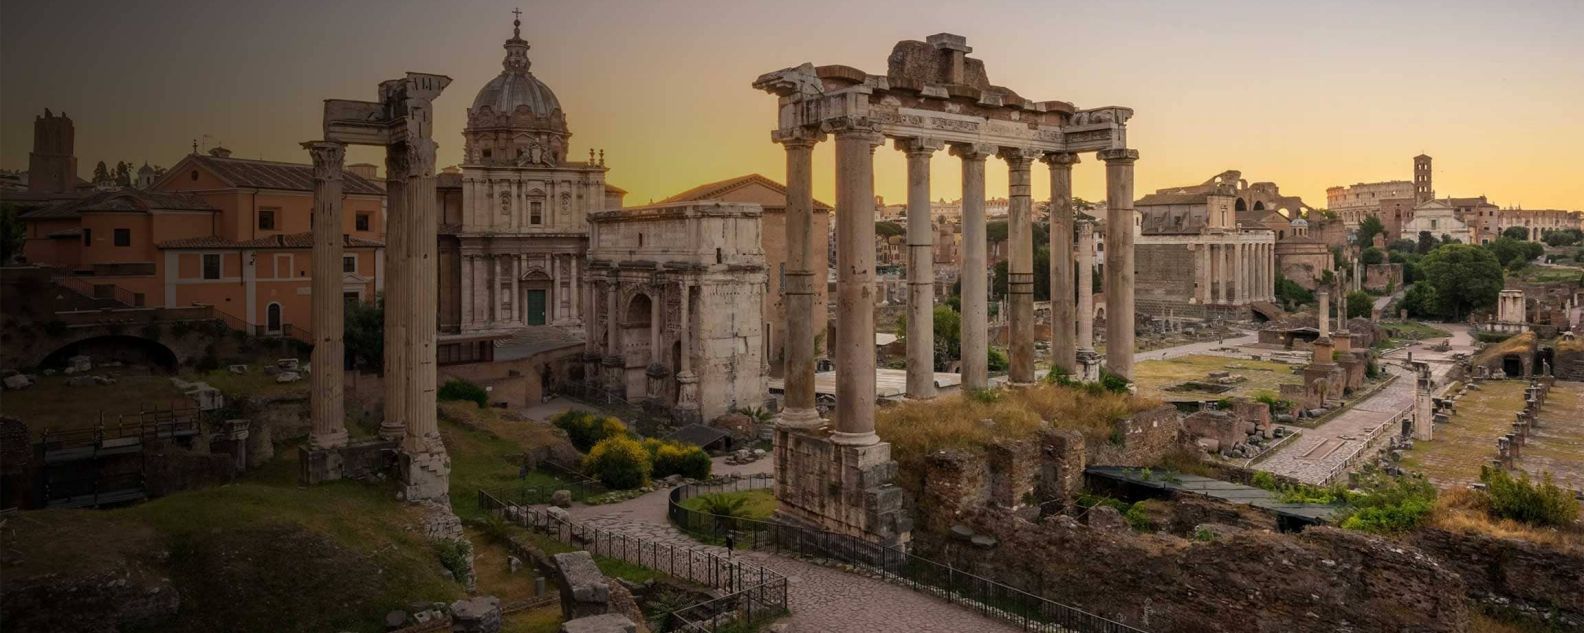 Ruins of the Roman Forum at sunrise, ancient government buildings, temple and shrine of Roman empire